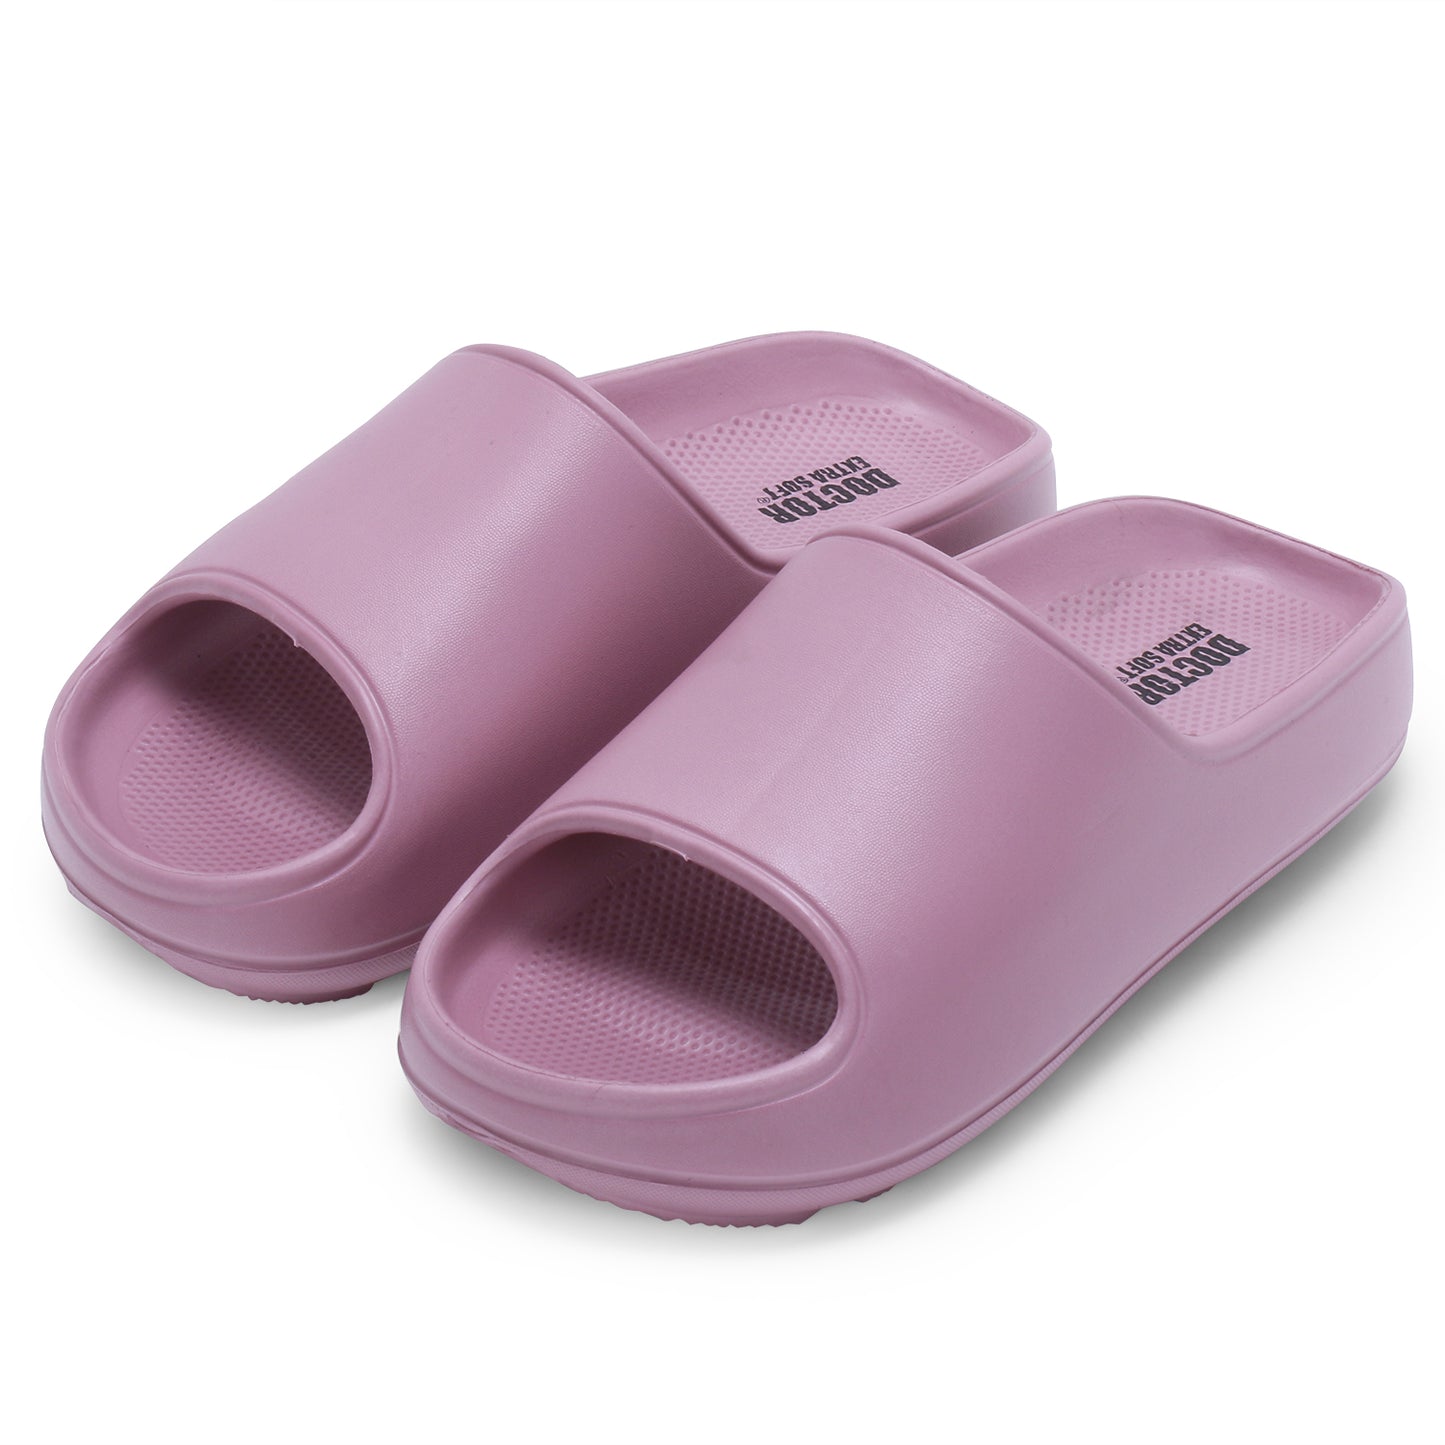 DOCTOR EXTRA SOFT D-508 Women's Classic Ultra Soft Sliders/Slippers with Cushion FootBed for Adult | Comfortable & Light Weight| Stylish & Anti-Skid| Waterproof & Everyday Flip Flops for Ladies/Girls